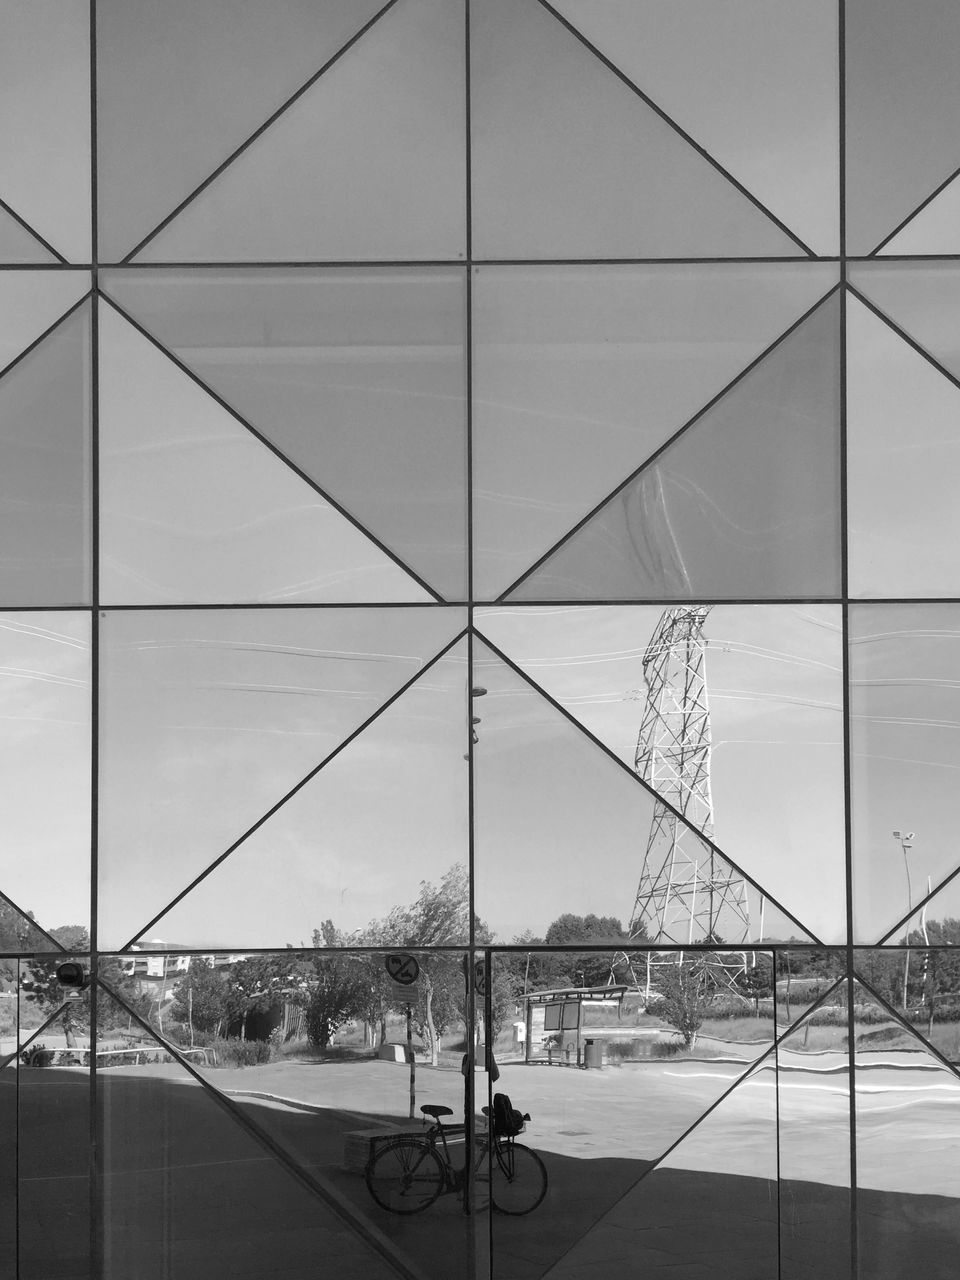 DIGITAL COMPOSITE IMAGE OF GLASS BUILDING WITH REFLECTION